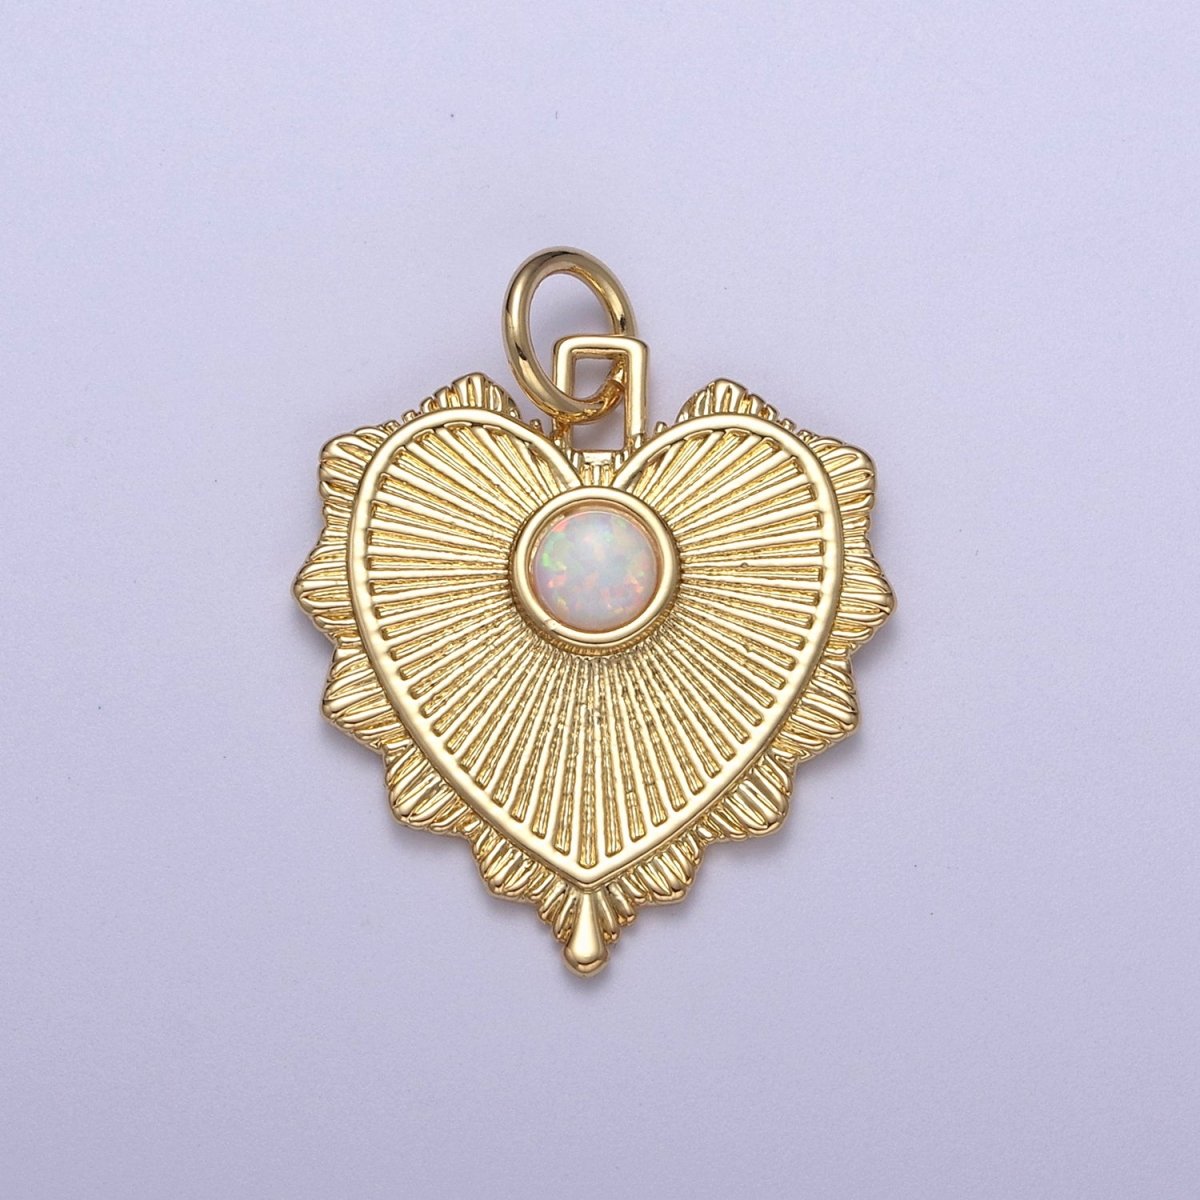 Gold Filled Radial Heart Charm Necklace, Opal Sunburst Gold Token Pendant, Dainty Heart Love Valentine Gift Necklace Supply N-395 - DLUXCA